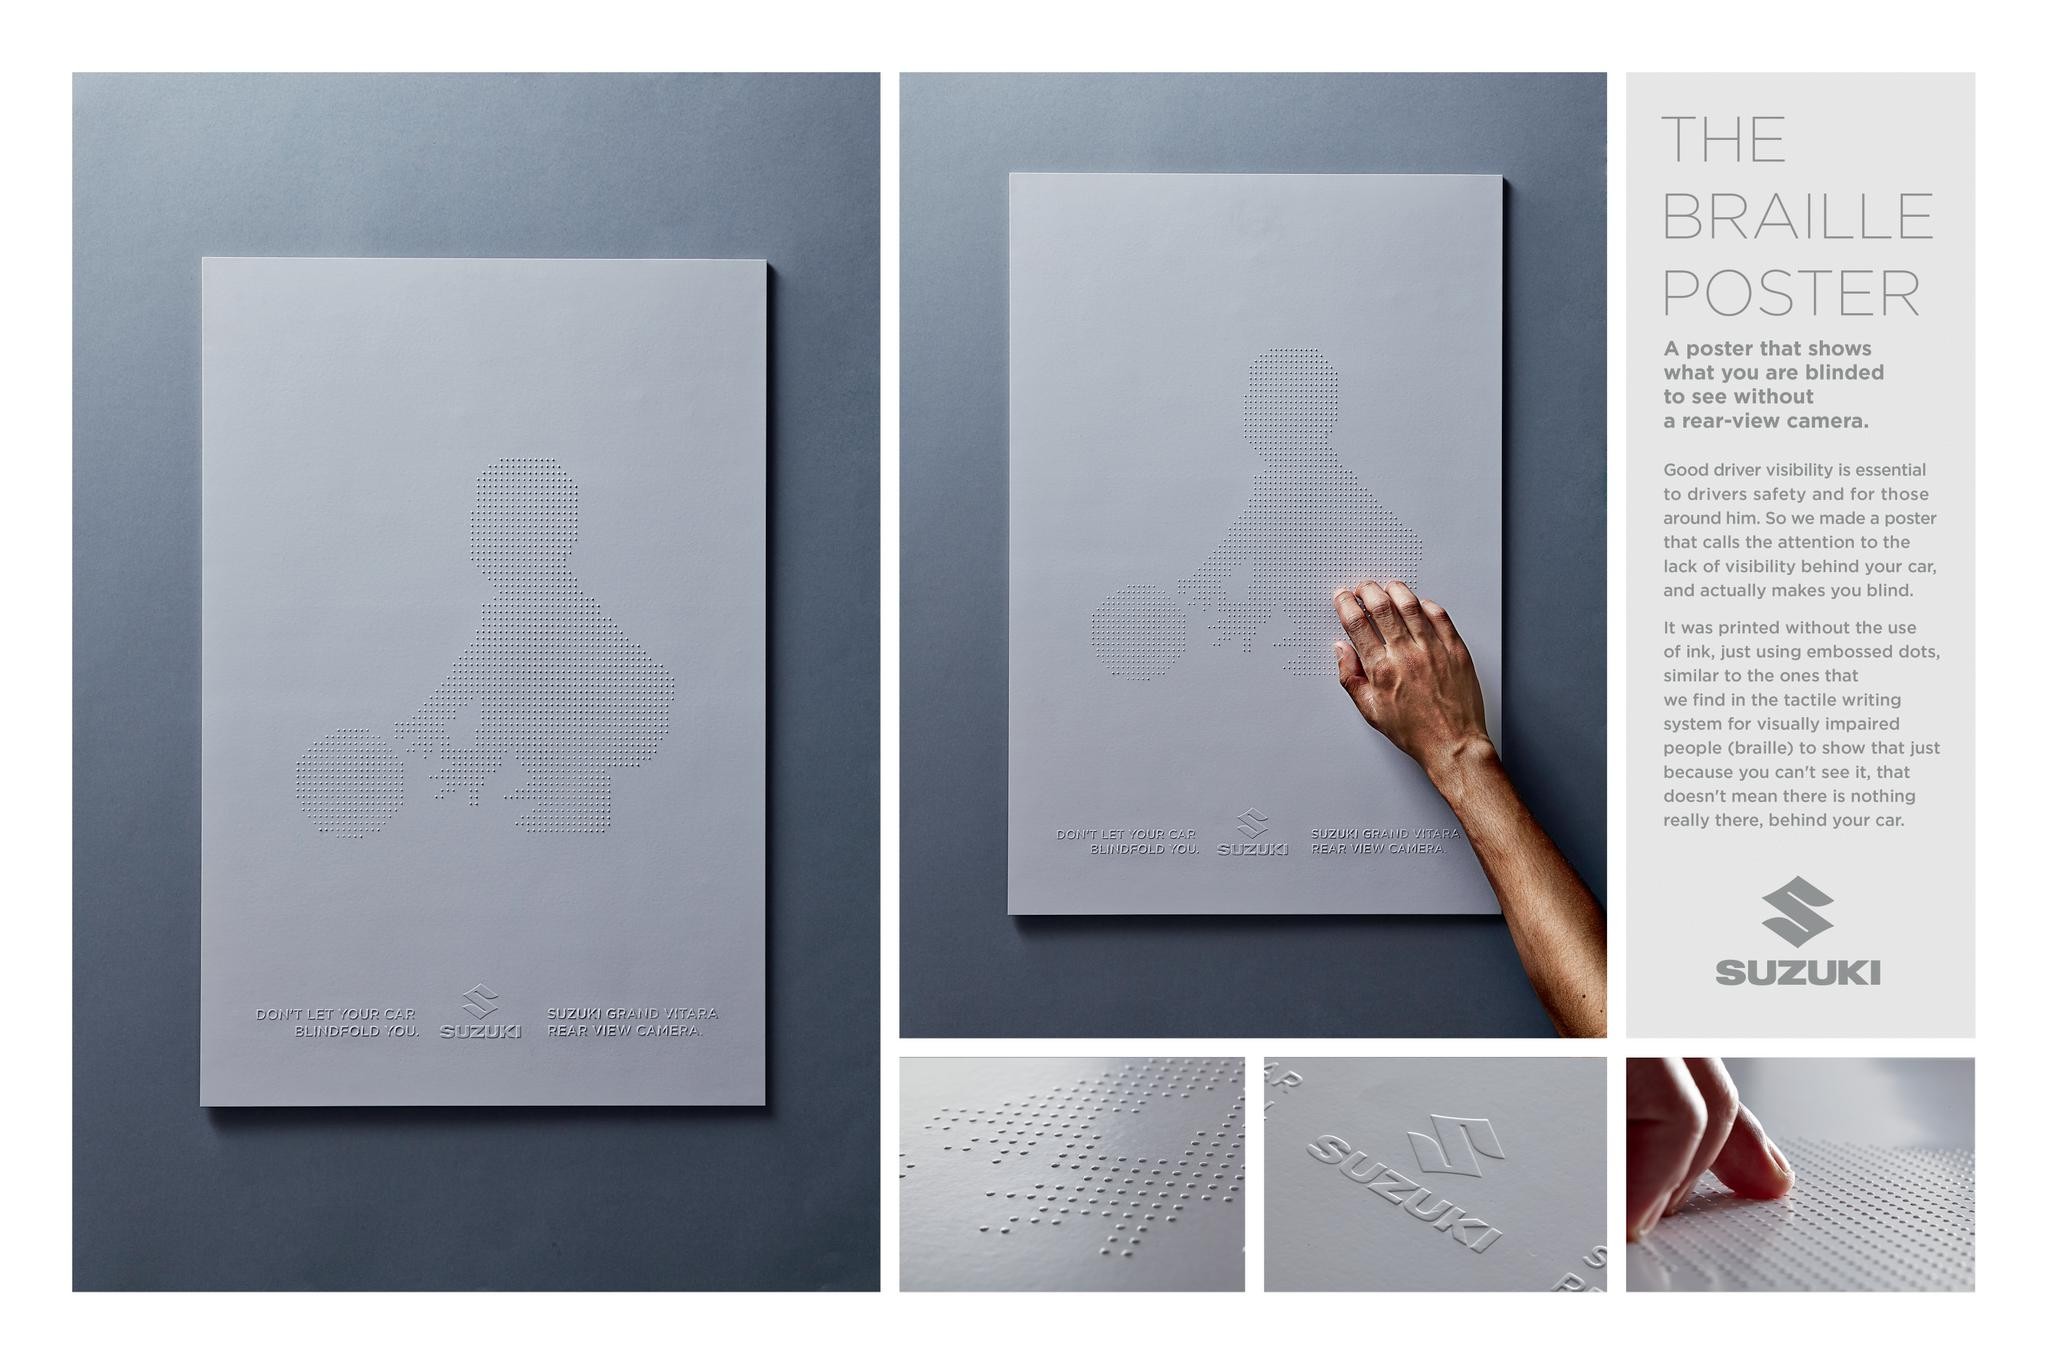 THE BRAILLE POSTER